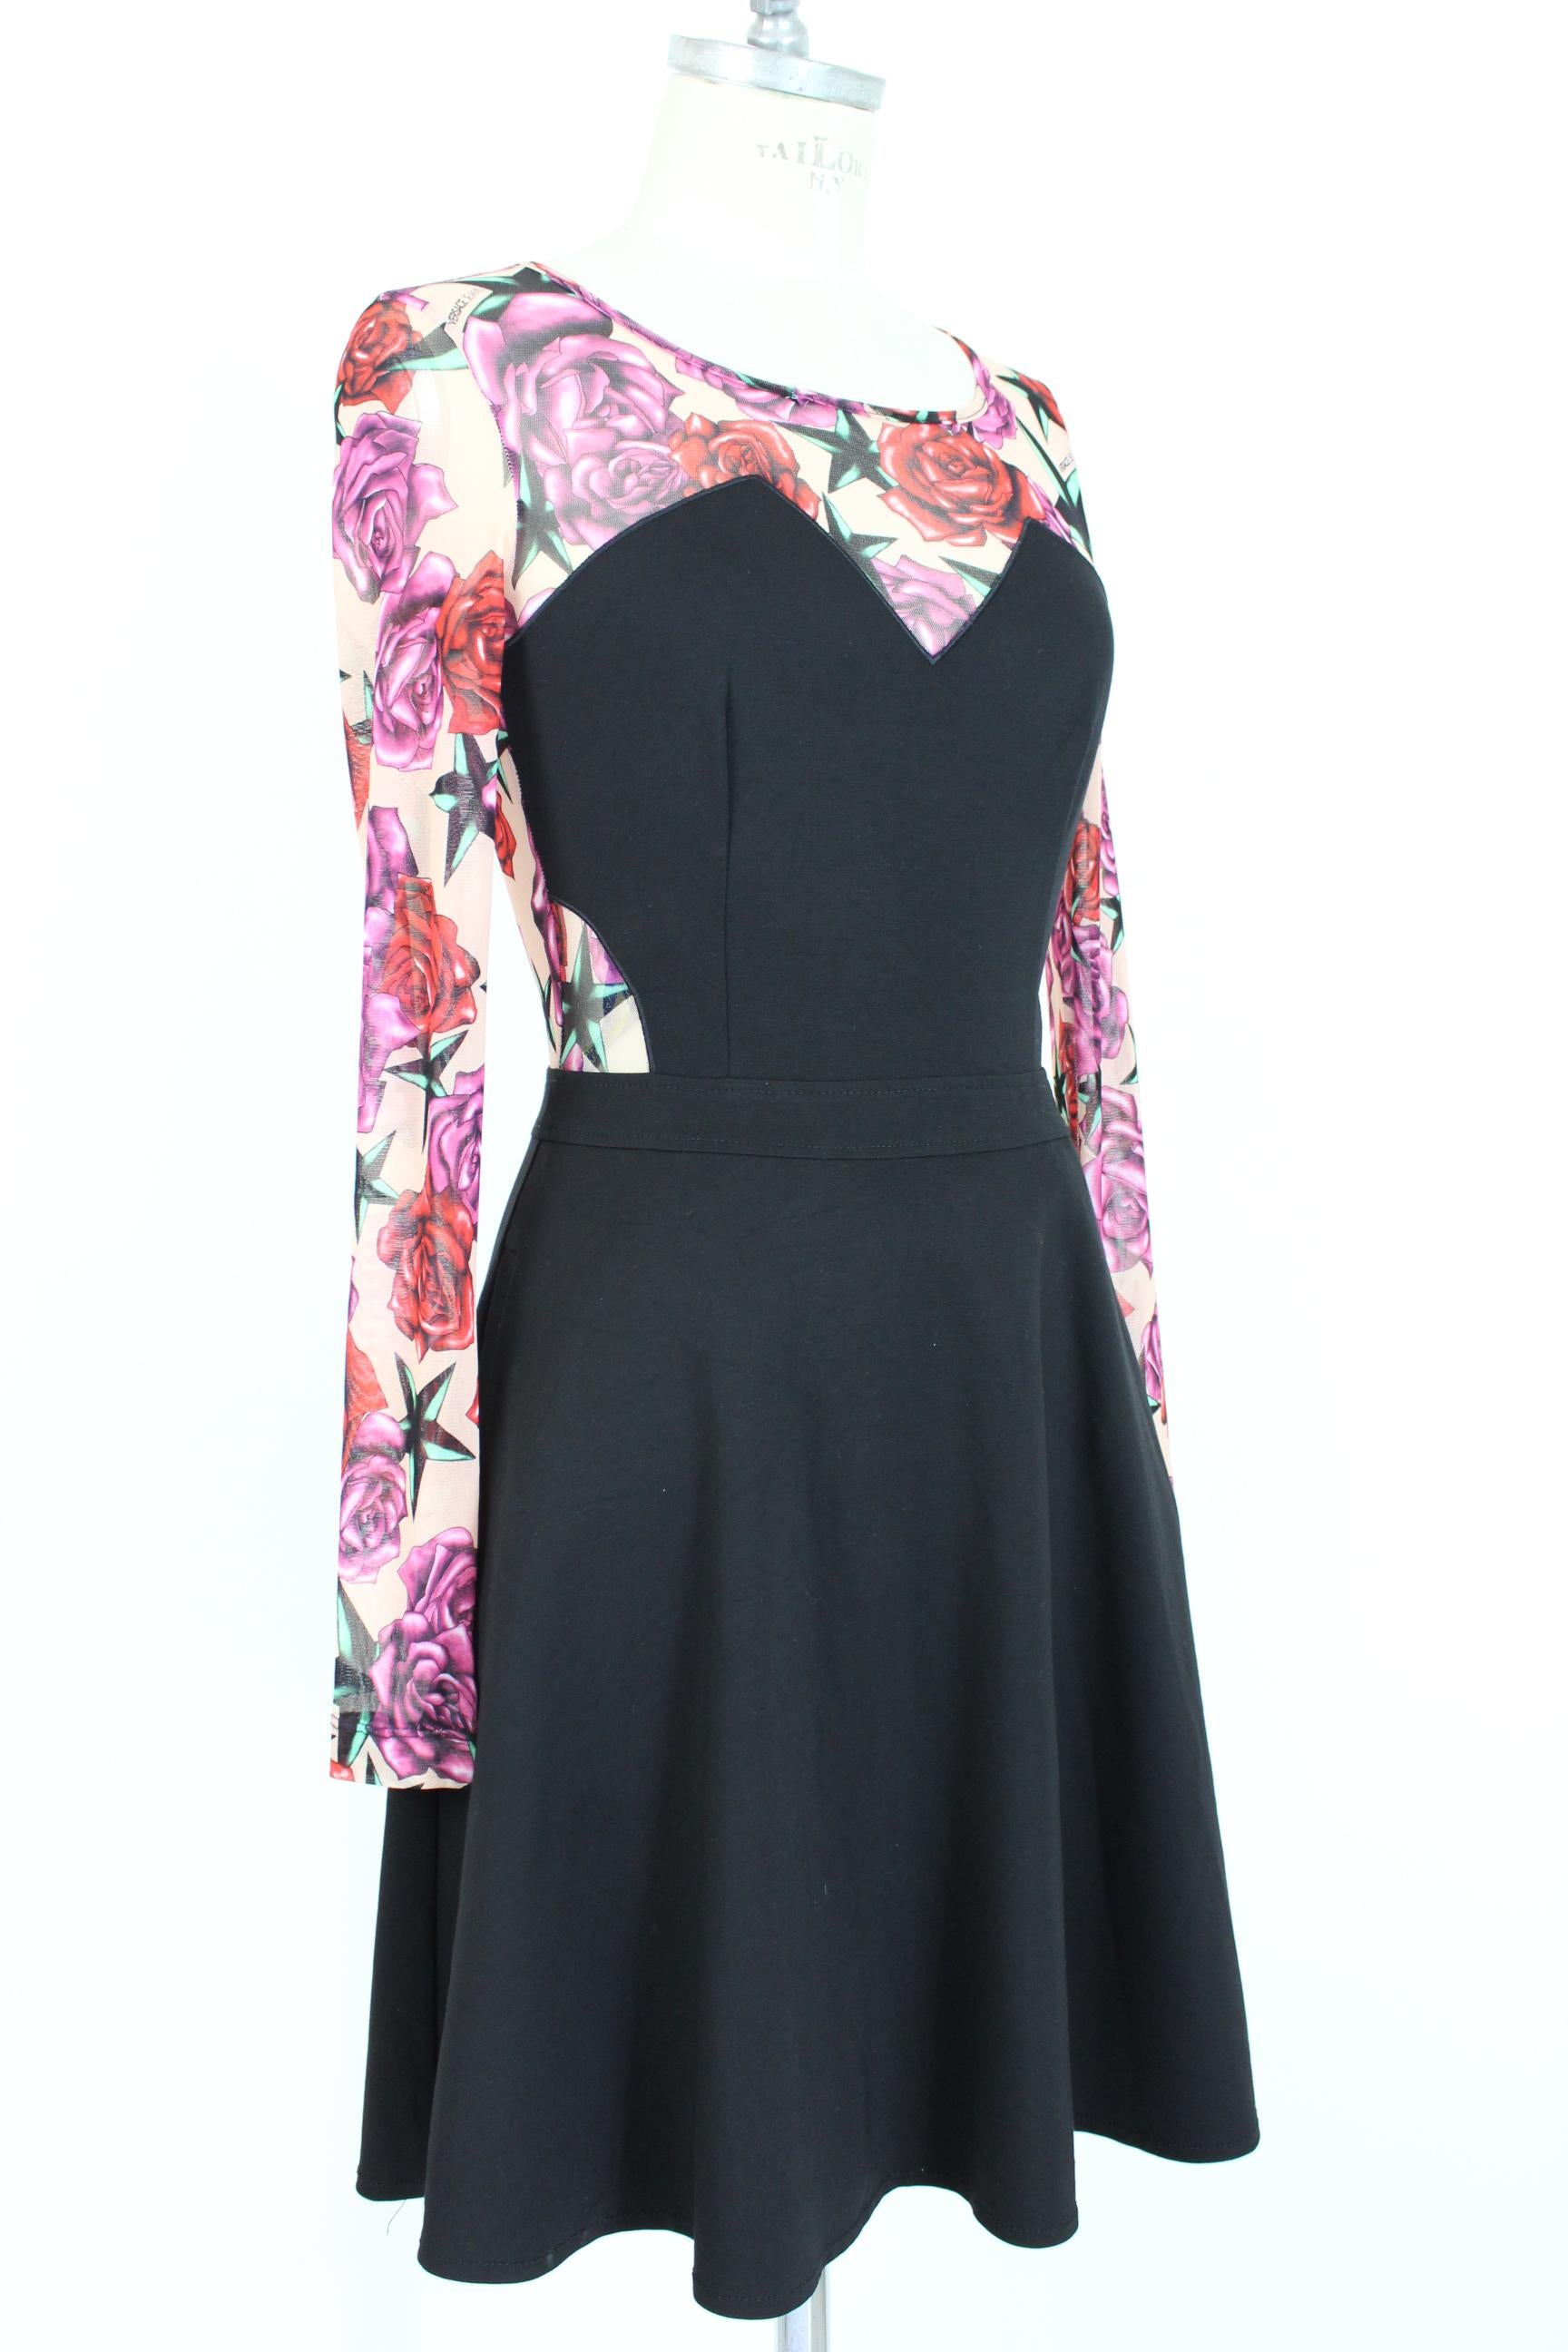 Versace Jeans Black Pink Floral Transparent Flared Short Cocktail Dress  In Excellent Condition In Brindisi, Bt